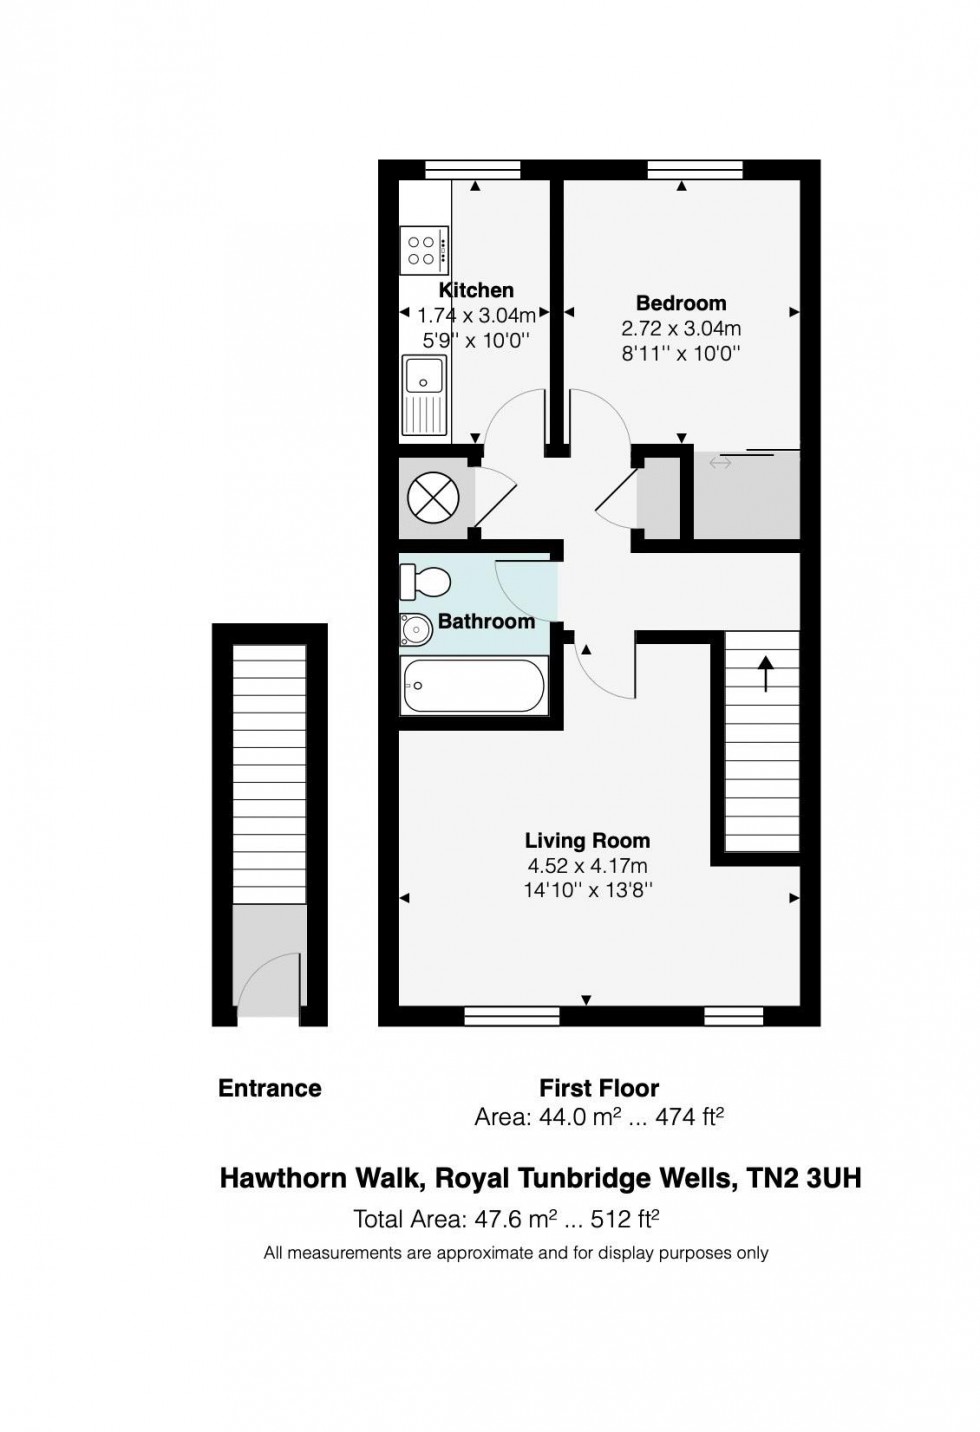 Floorplan for 1 Bed Flat with Parking, Hawthorn Walk